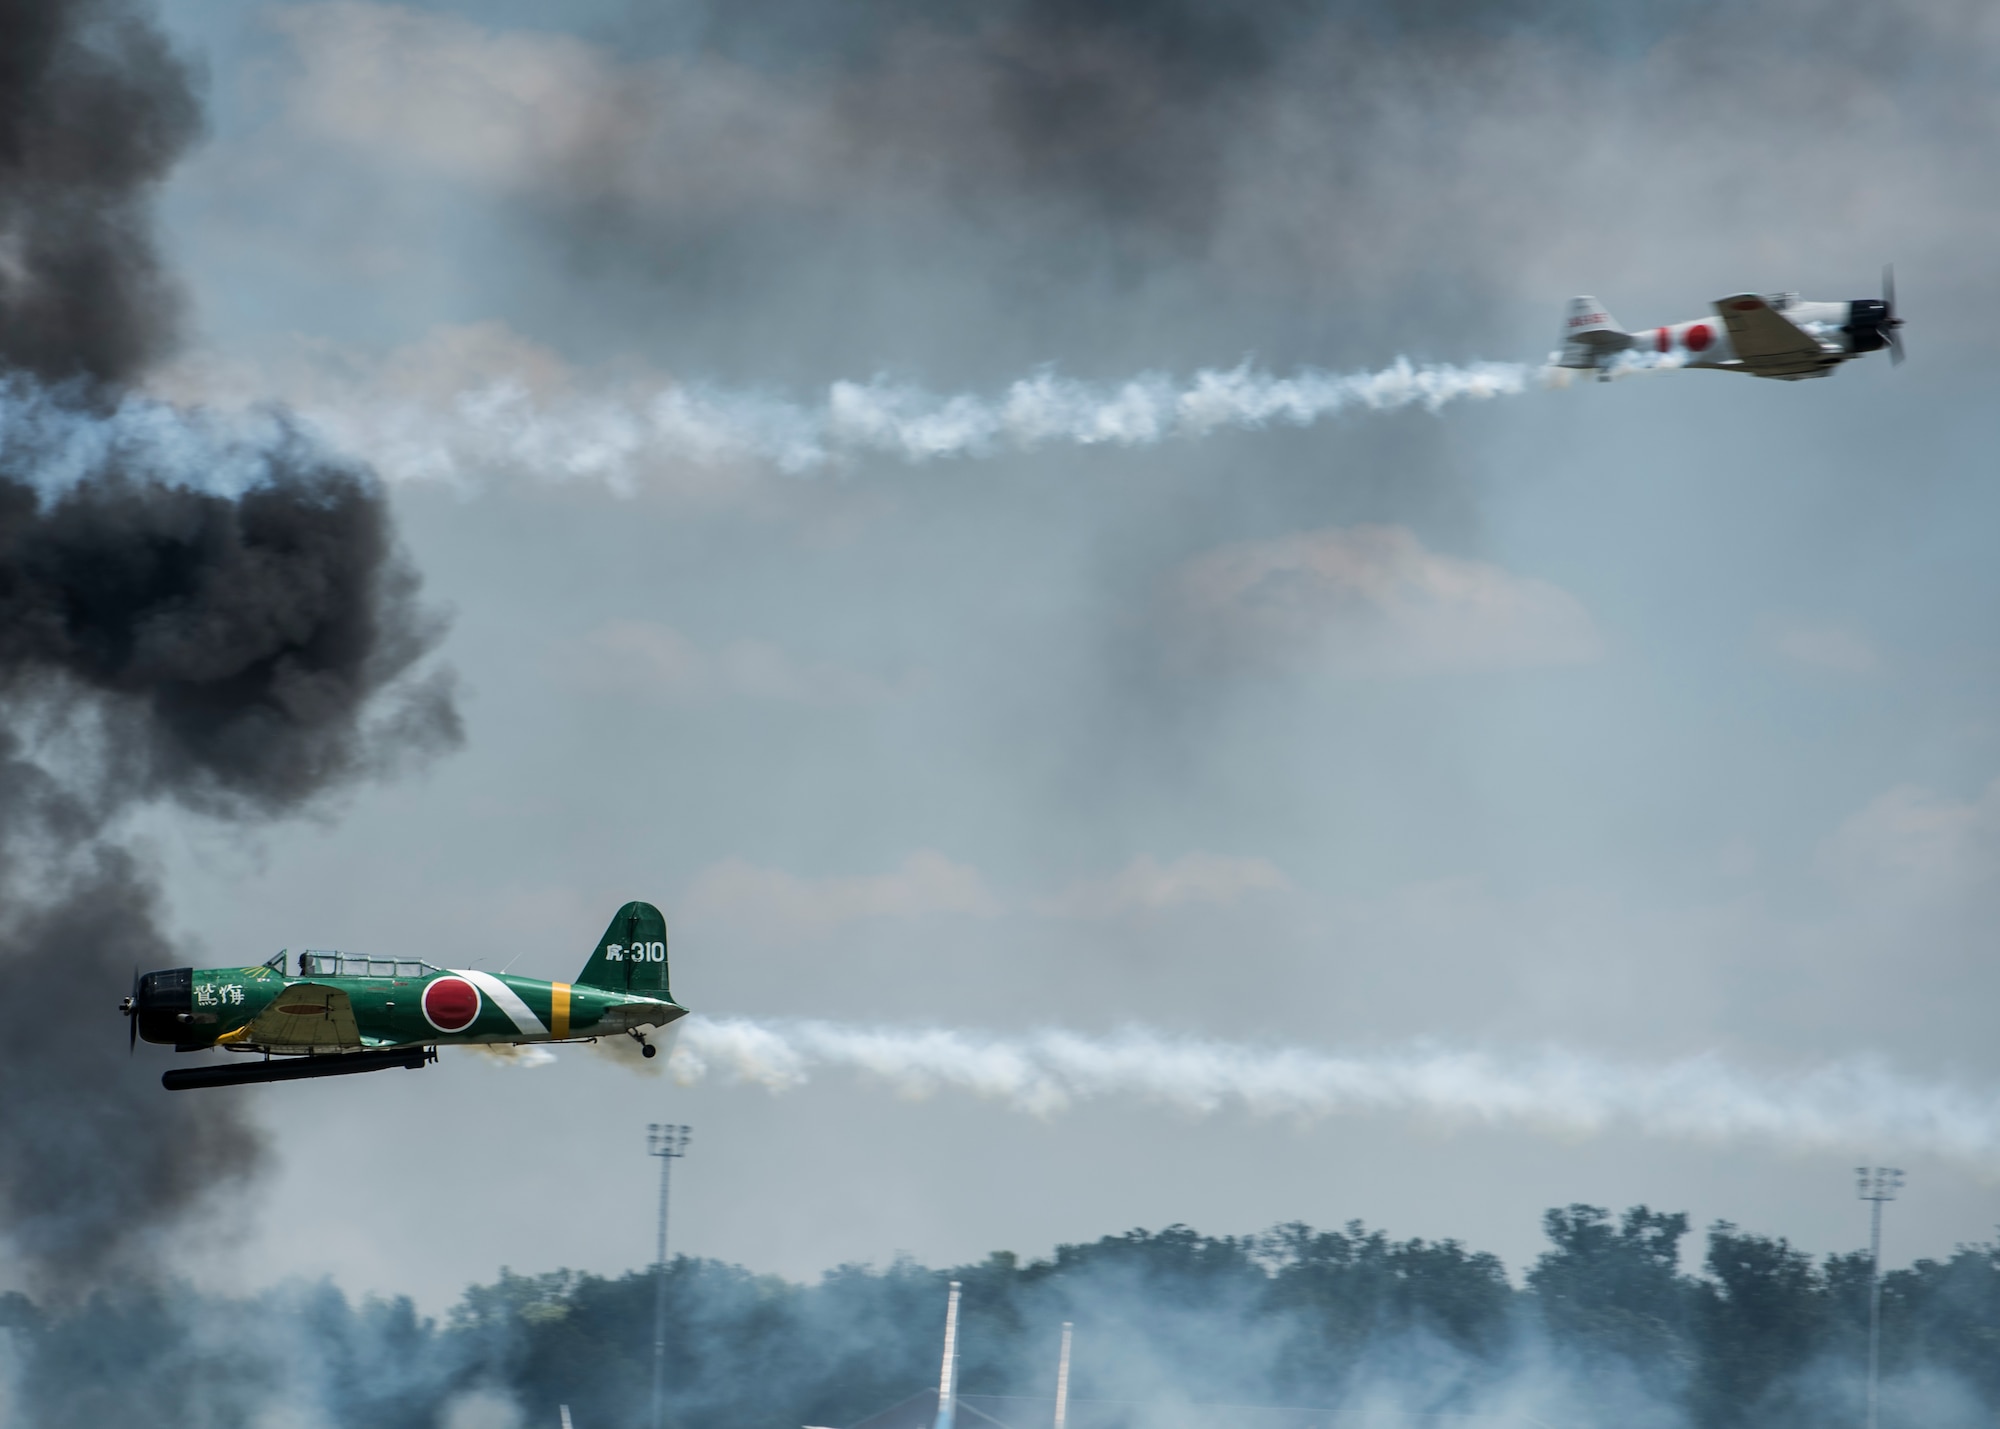 "Tora, Tora, Tora," performs the re-creation of the Dec. 7, 1941, attack on Pearl Harbor during the 100th Centennial Celebration Air Show, June 11, 2017, at Scott Air Force Base, Ill. Tora, Tora, Tora began in 1972, when six replica Japanese aircraft used in the movie of the same name were donated to the CAF. The act debuted at the Galveston Air Show on June 25, 1972 and by 1977, Tora had gained national exposure. In 1991 Tora participated extensively in the 50th anniversary year commemorations of Pearl Harbor.  (U.S. Air Force photo by Staff Sgt. Jodi Martinez)